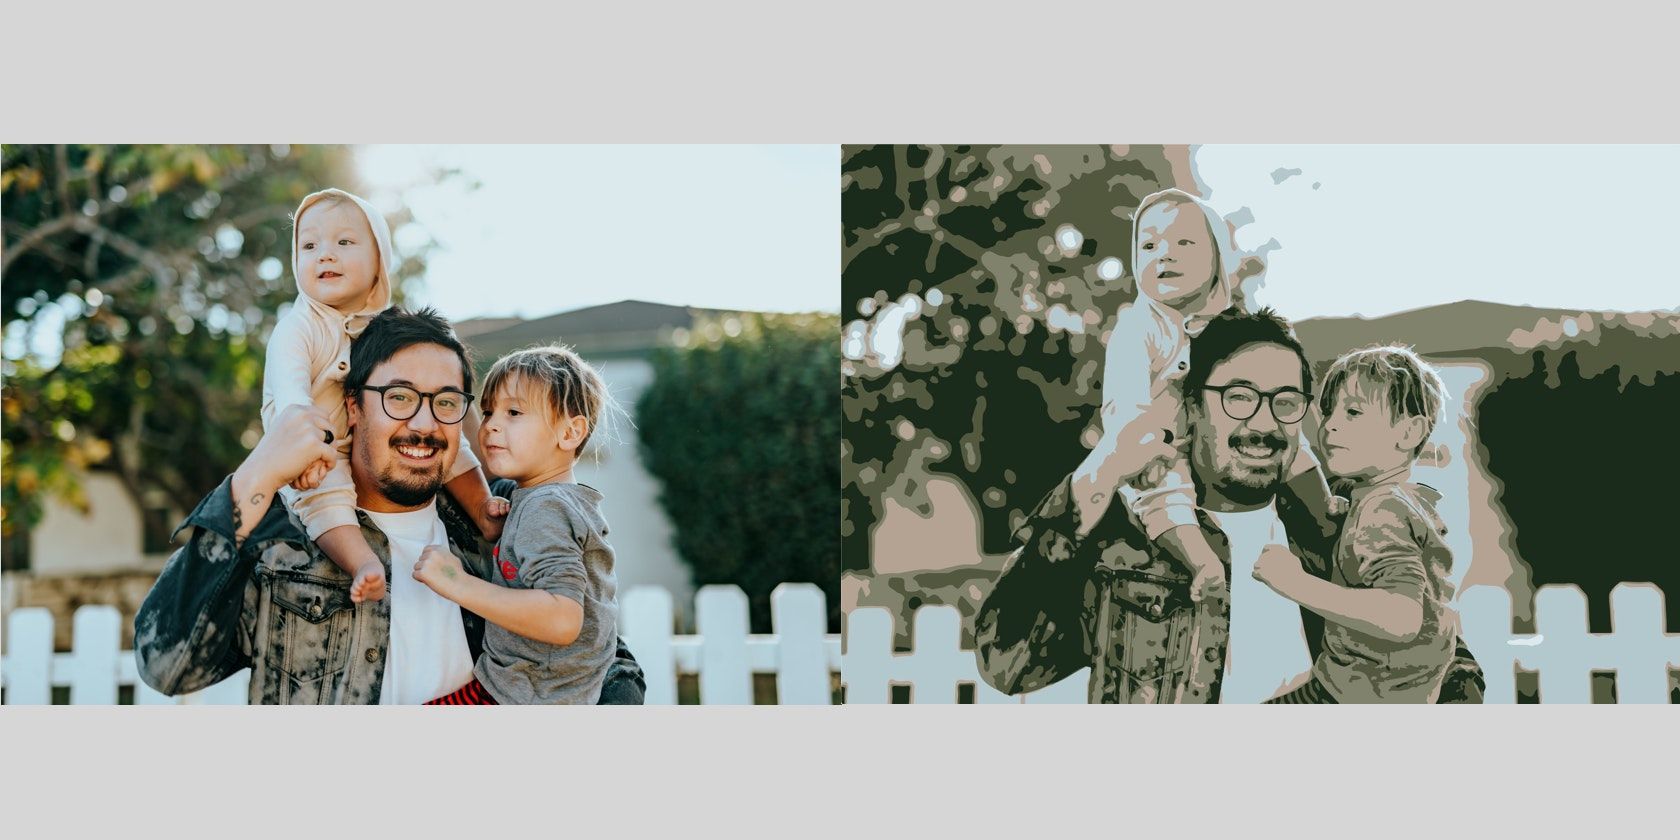 There are two family photos side by side. The right side has a stylized art effect applied.